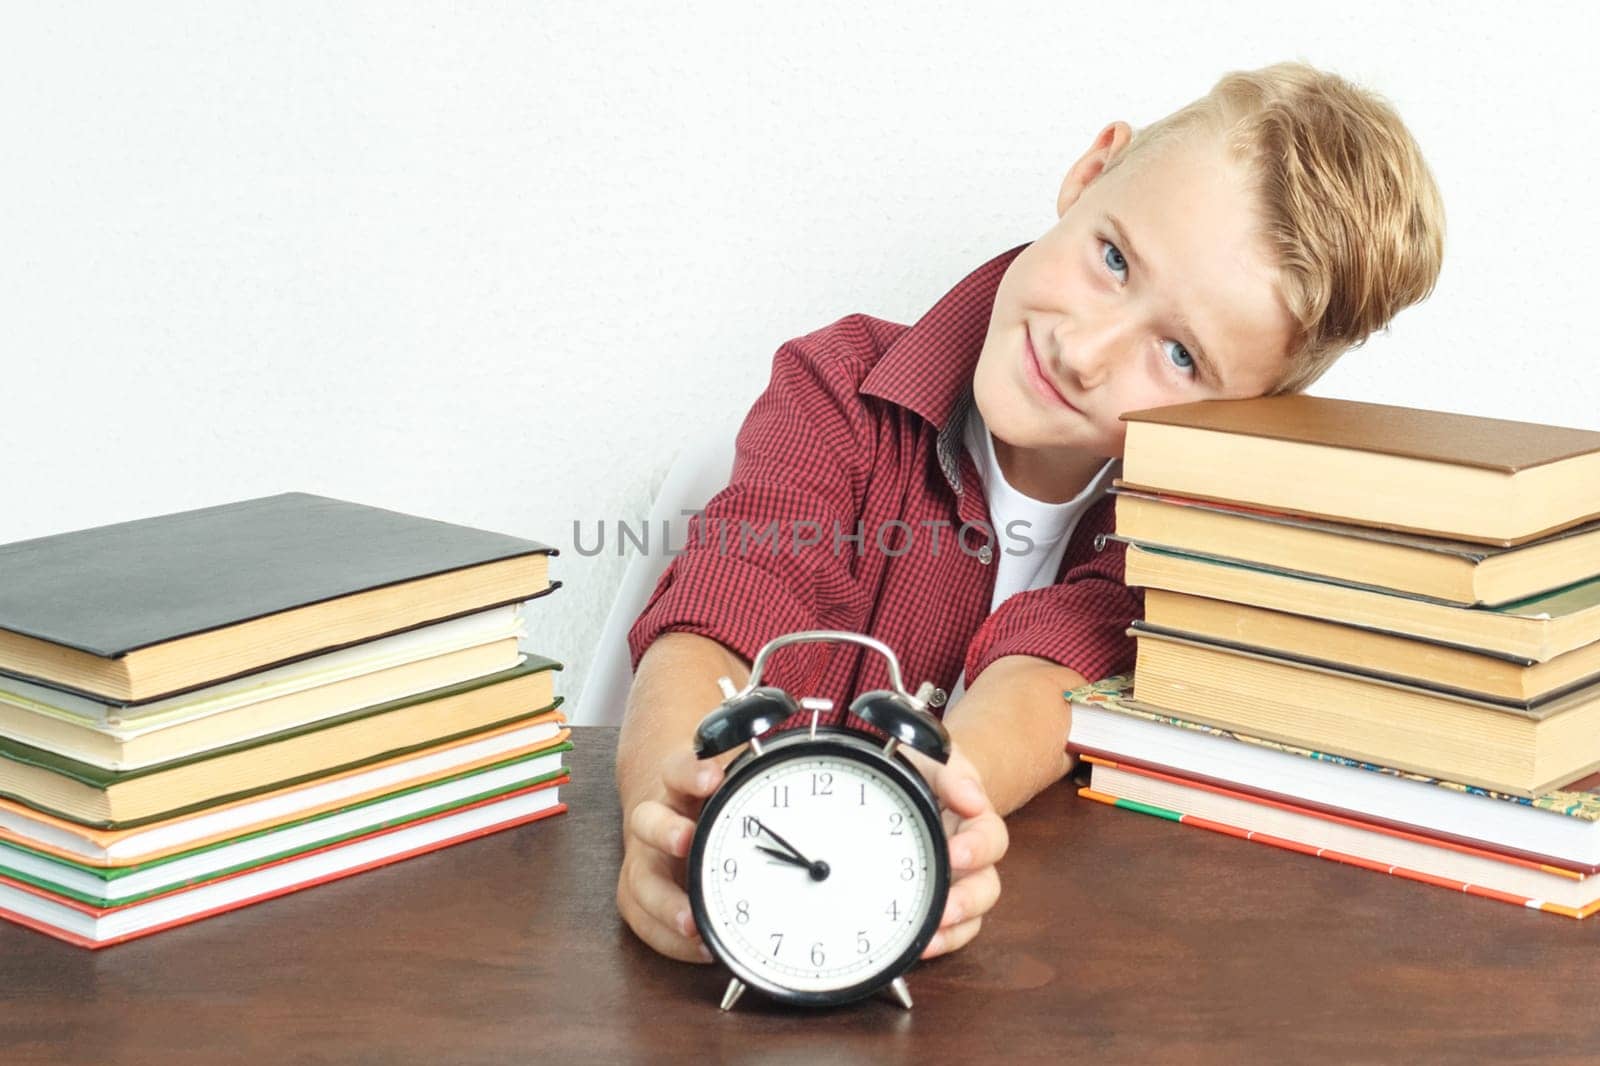 Education concept. The schoolboy sits at the table and holds an alarm clock in his hands.